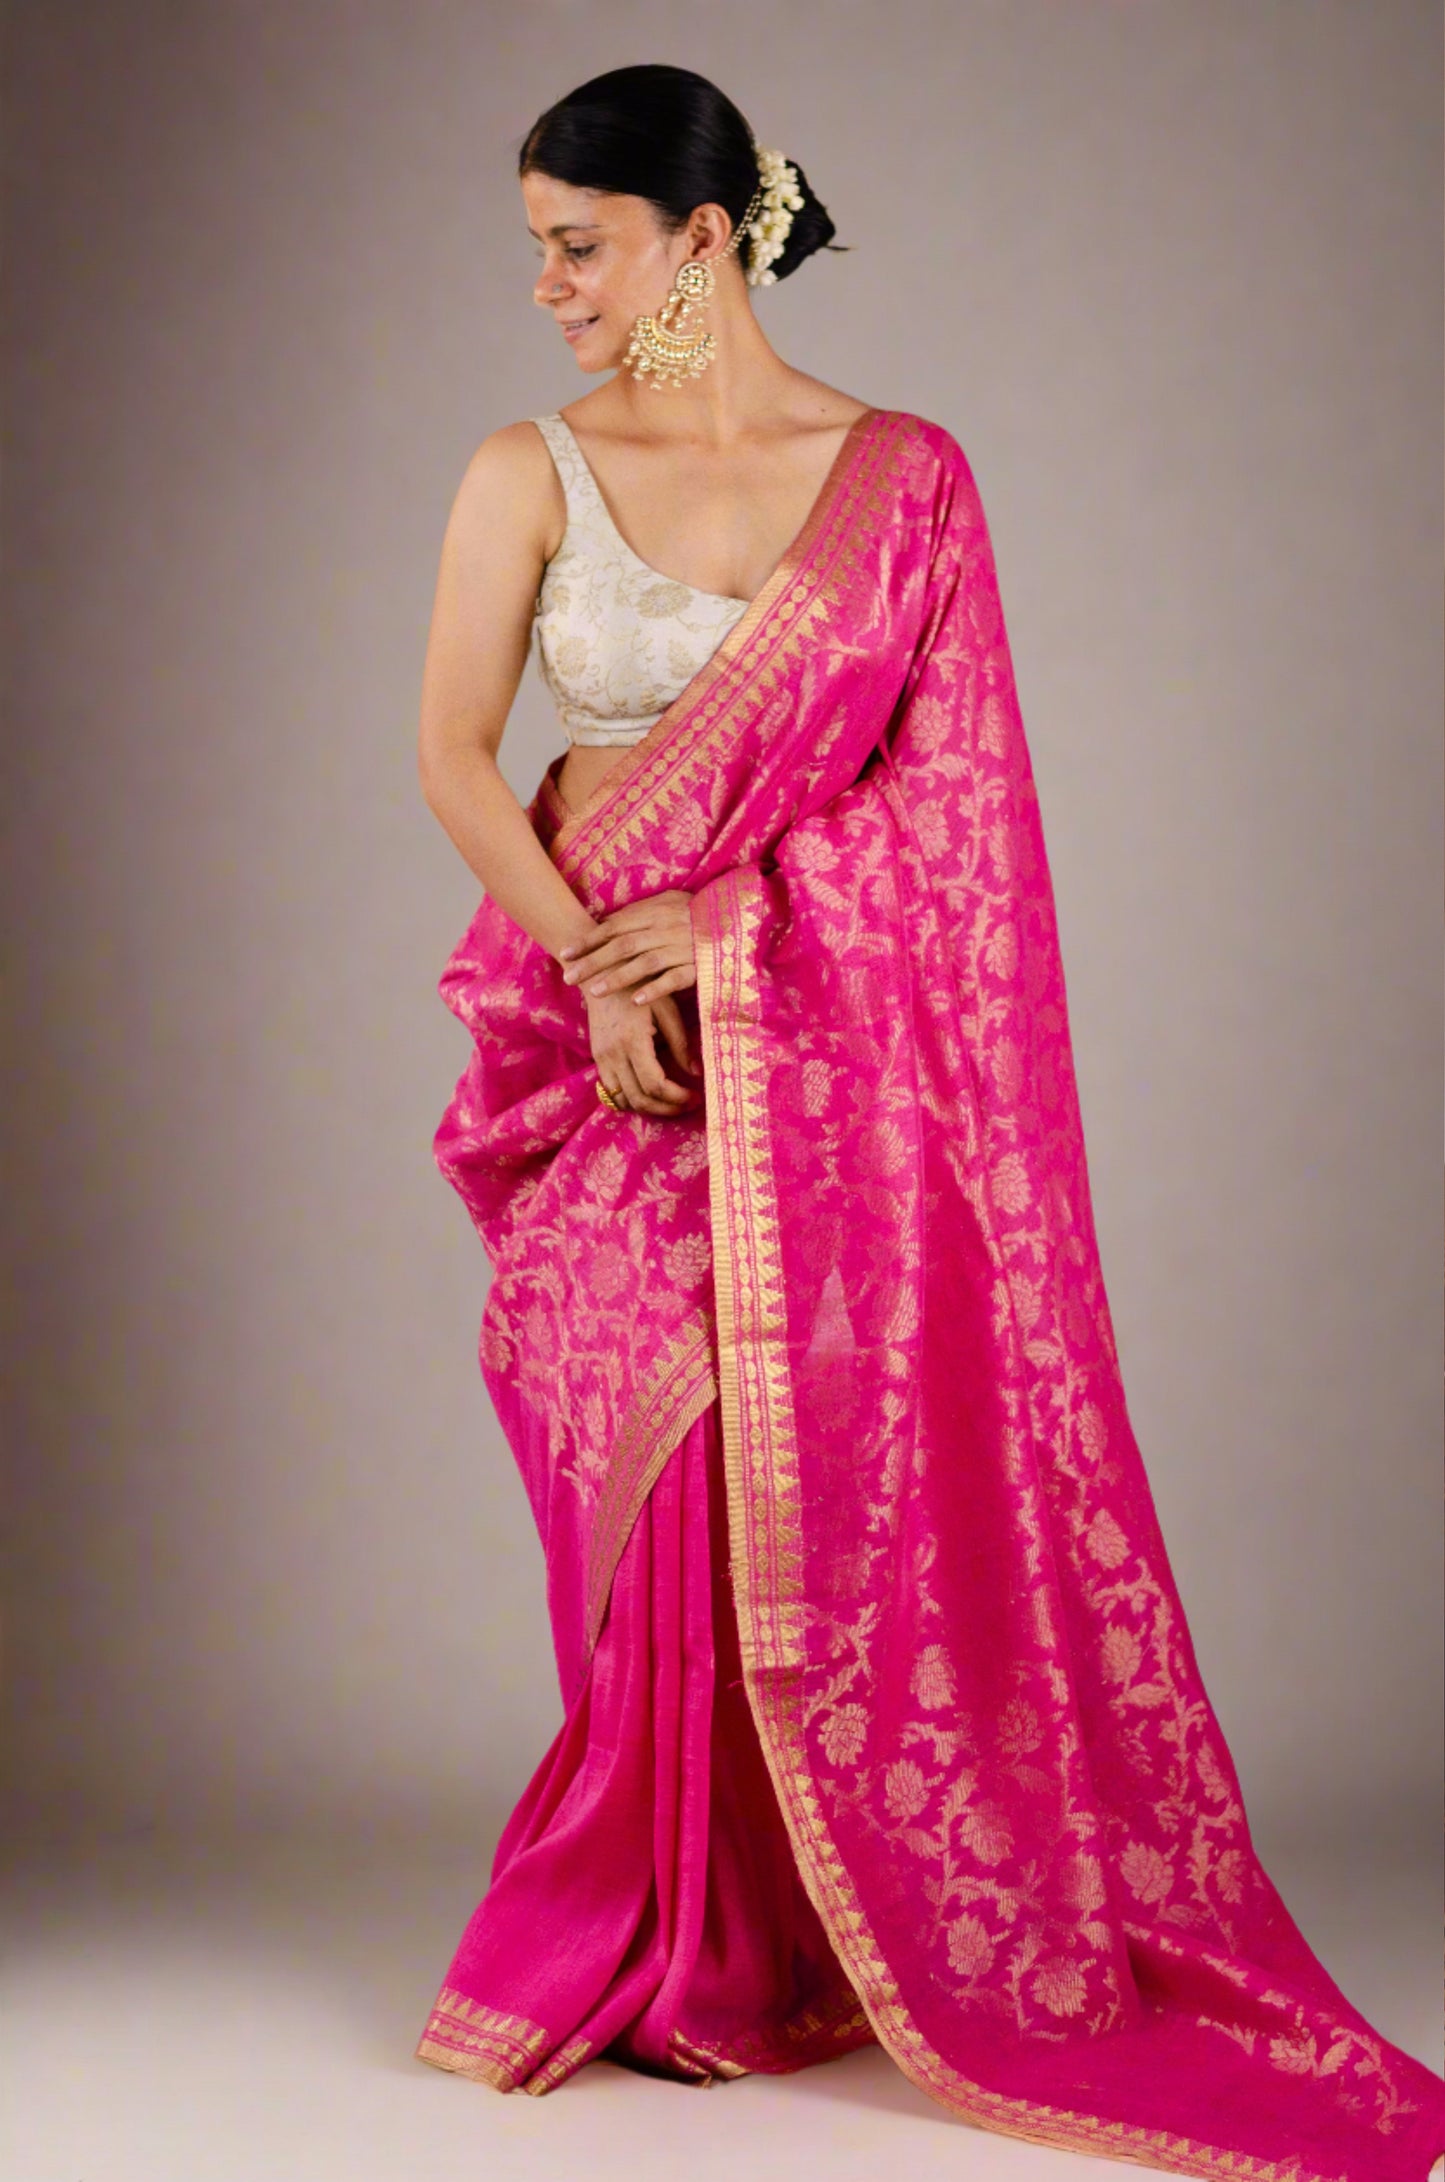 Jacquard Weaving Linen Saree With Gold And Silver Motifs In Aanchal